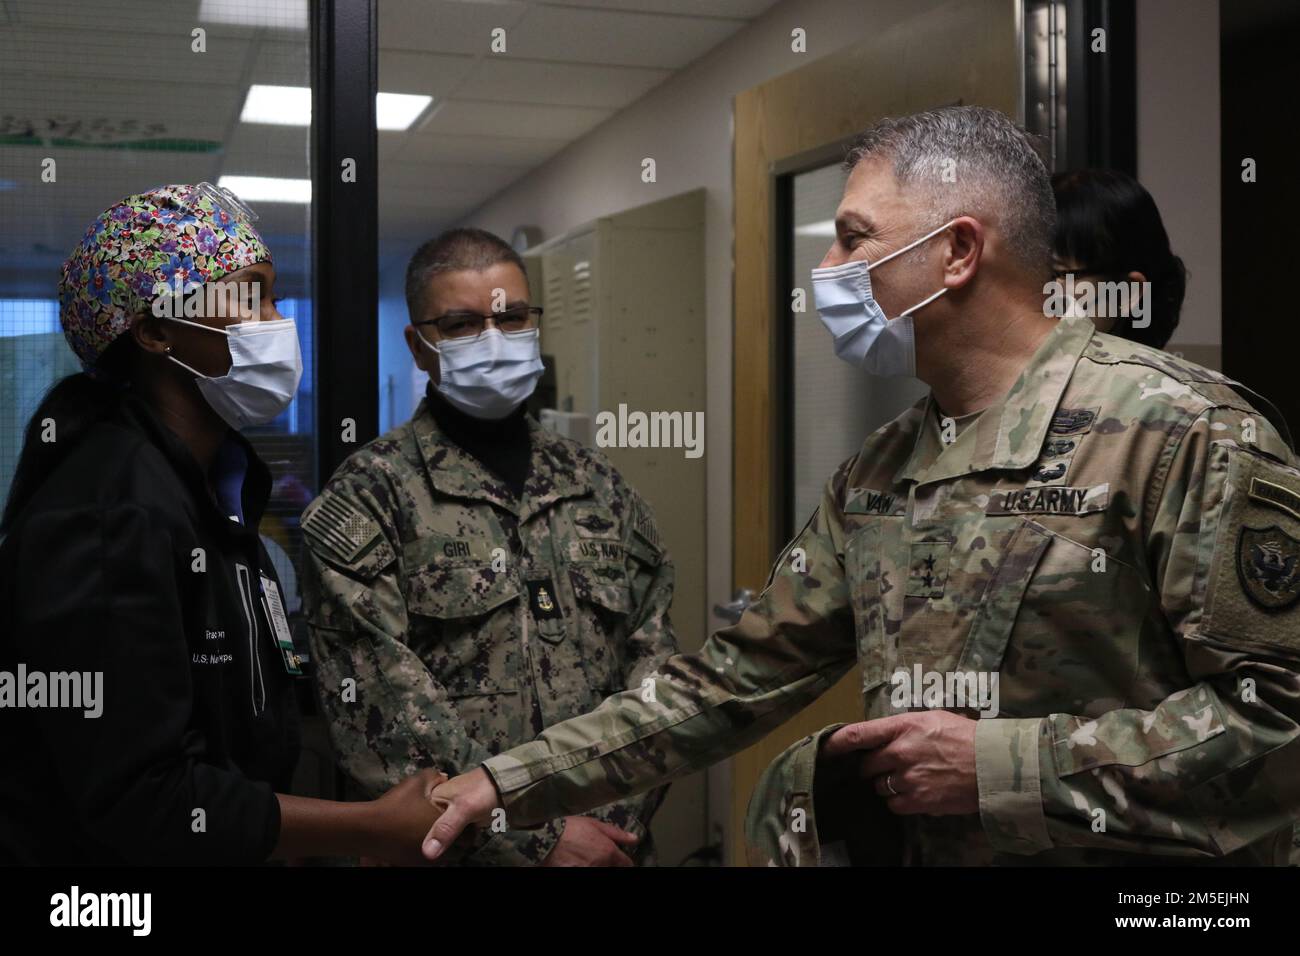 BUFFALO, N.Y. – U.S. Army Maj. Gen. Jeff Van, the Joint Task Force Civil Support commanding general, expresses his appreciation to U.S. Navy Lt. j.g. Tracy Washington, a nurse supporting COVID response operations, at Erie County Medical Center in Buffalo, New York, March 8, 2022. Northern Command, through U.S. Army North, remains committed to providing flexible Department of Defense support to the whole-of-government COVID response. Stock Photo